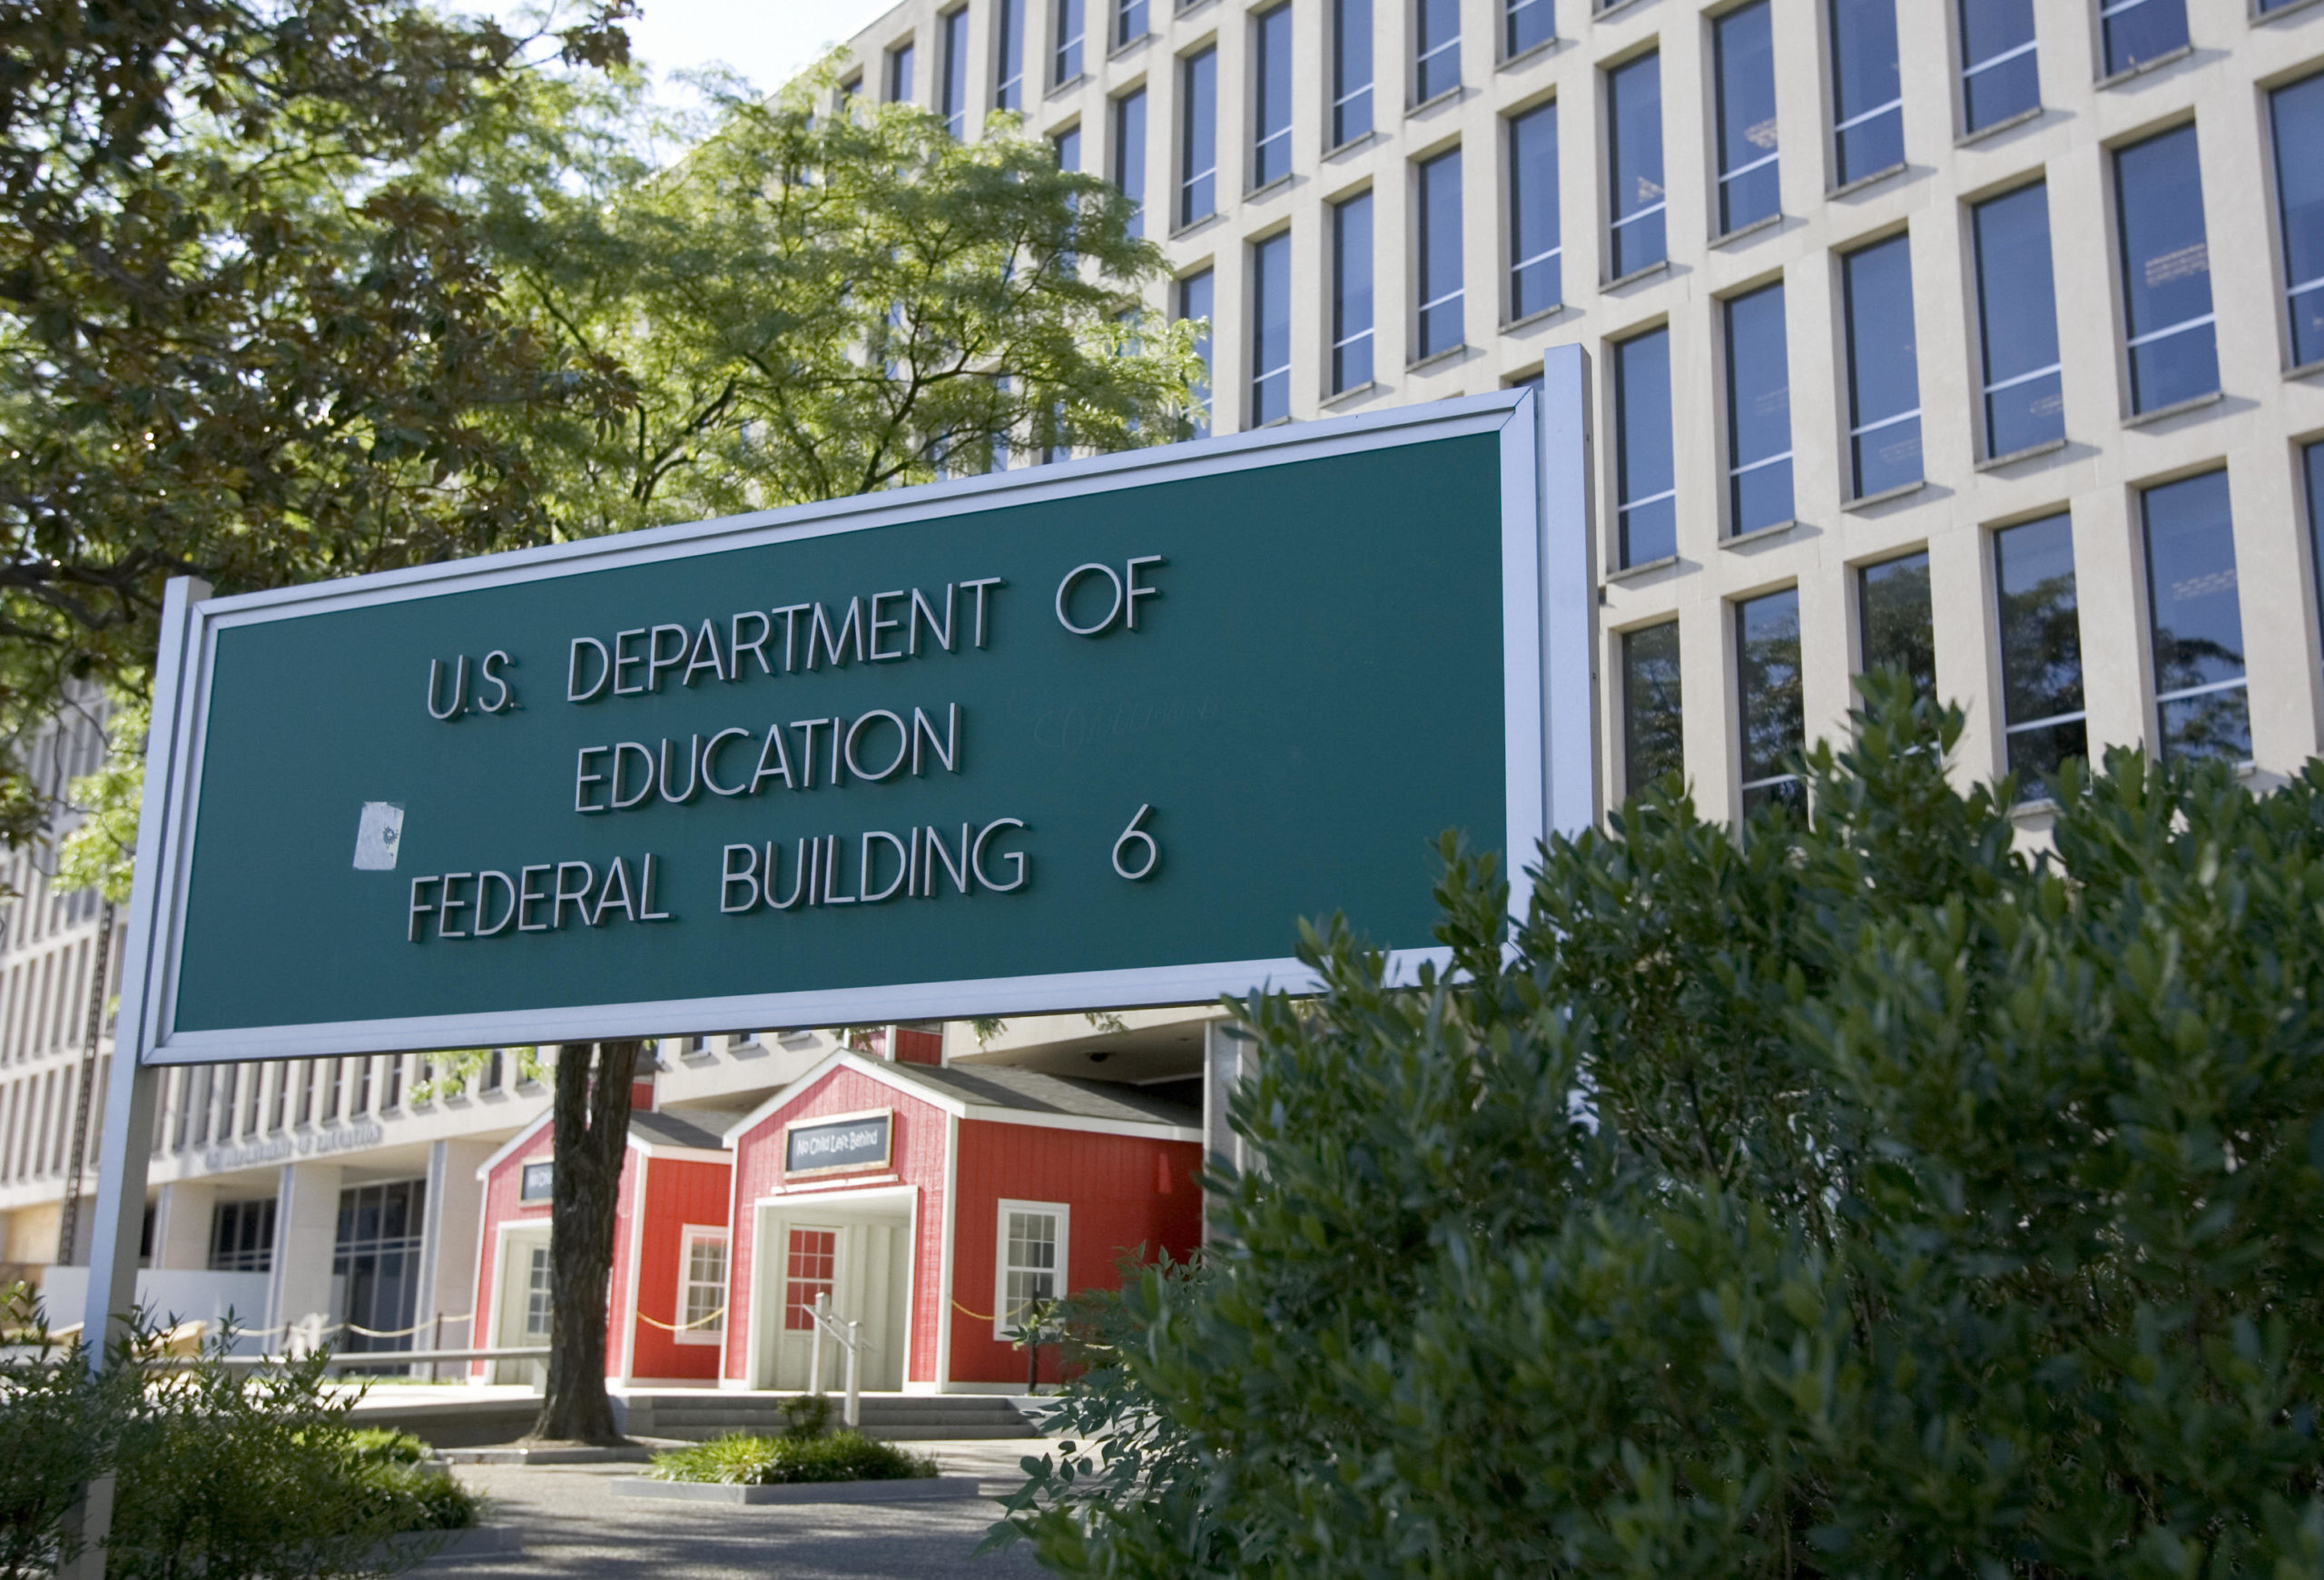 Washington, UNITED STATES: The US Department of Education building is shown in Washington, DC, 21 July 2007. Created in 1980 by combining offices from several federal agencies, the Department of Education has 4,500 employees and a budget of USD 71.5 billion. AFP PHOTO/Saul LOEB (Photo credit should read SAUL LOEB/AFP/Getty Images)